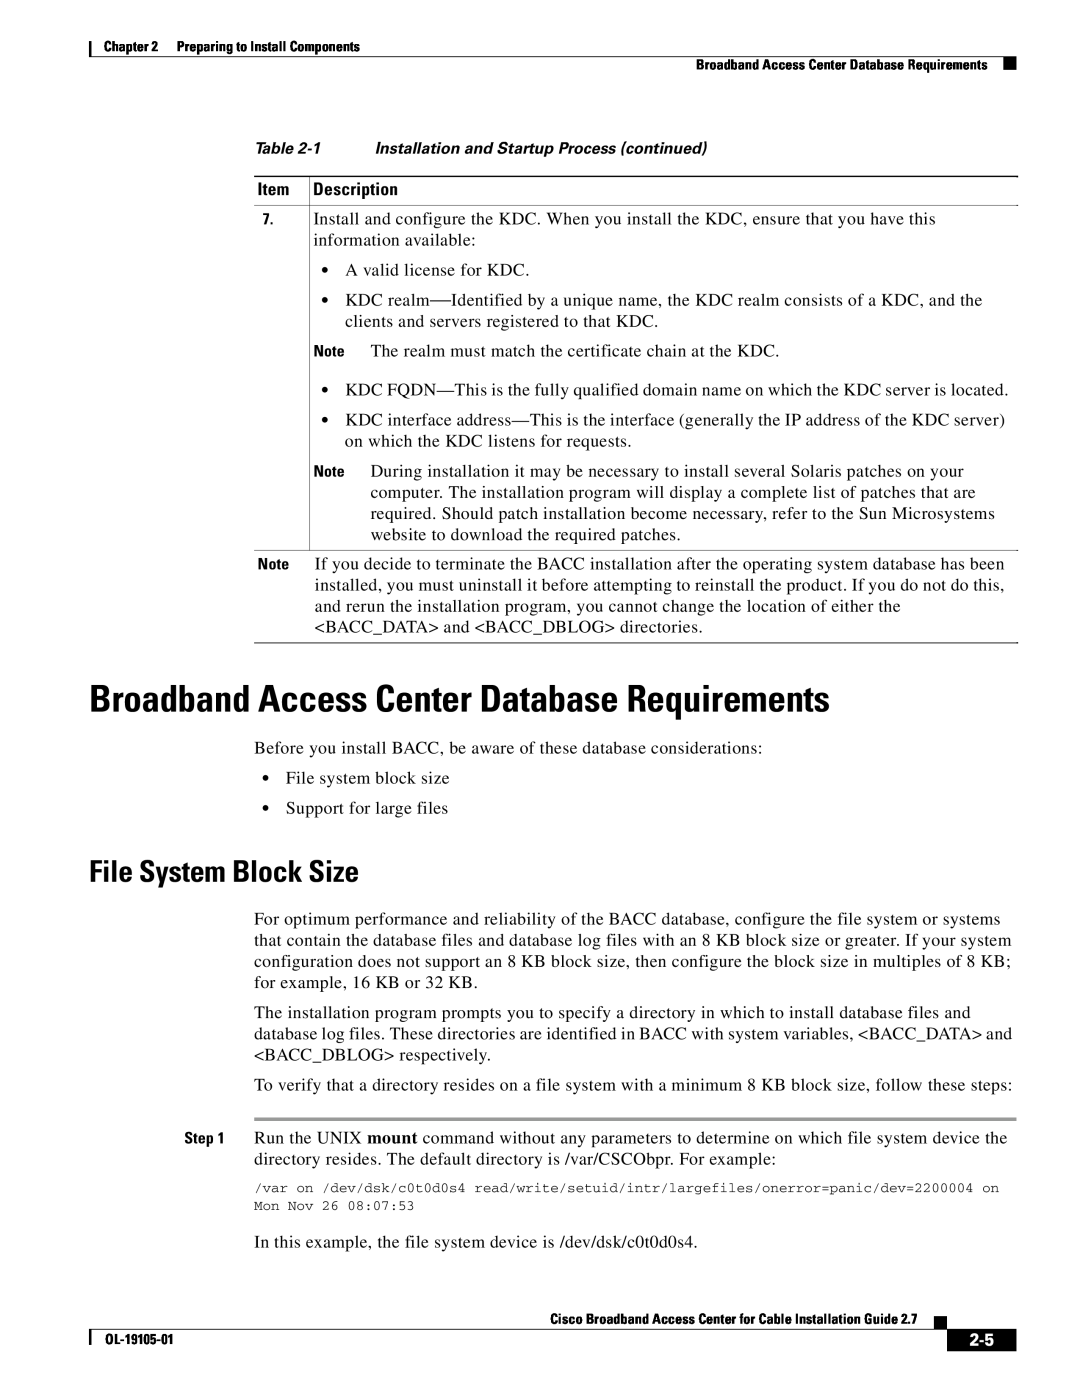 Cisco Systems manual Broadband Access Center Database Requirements, File System Block Size, Item Description 